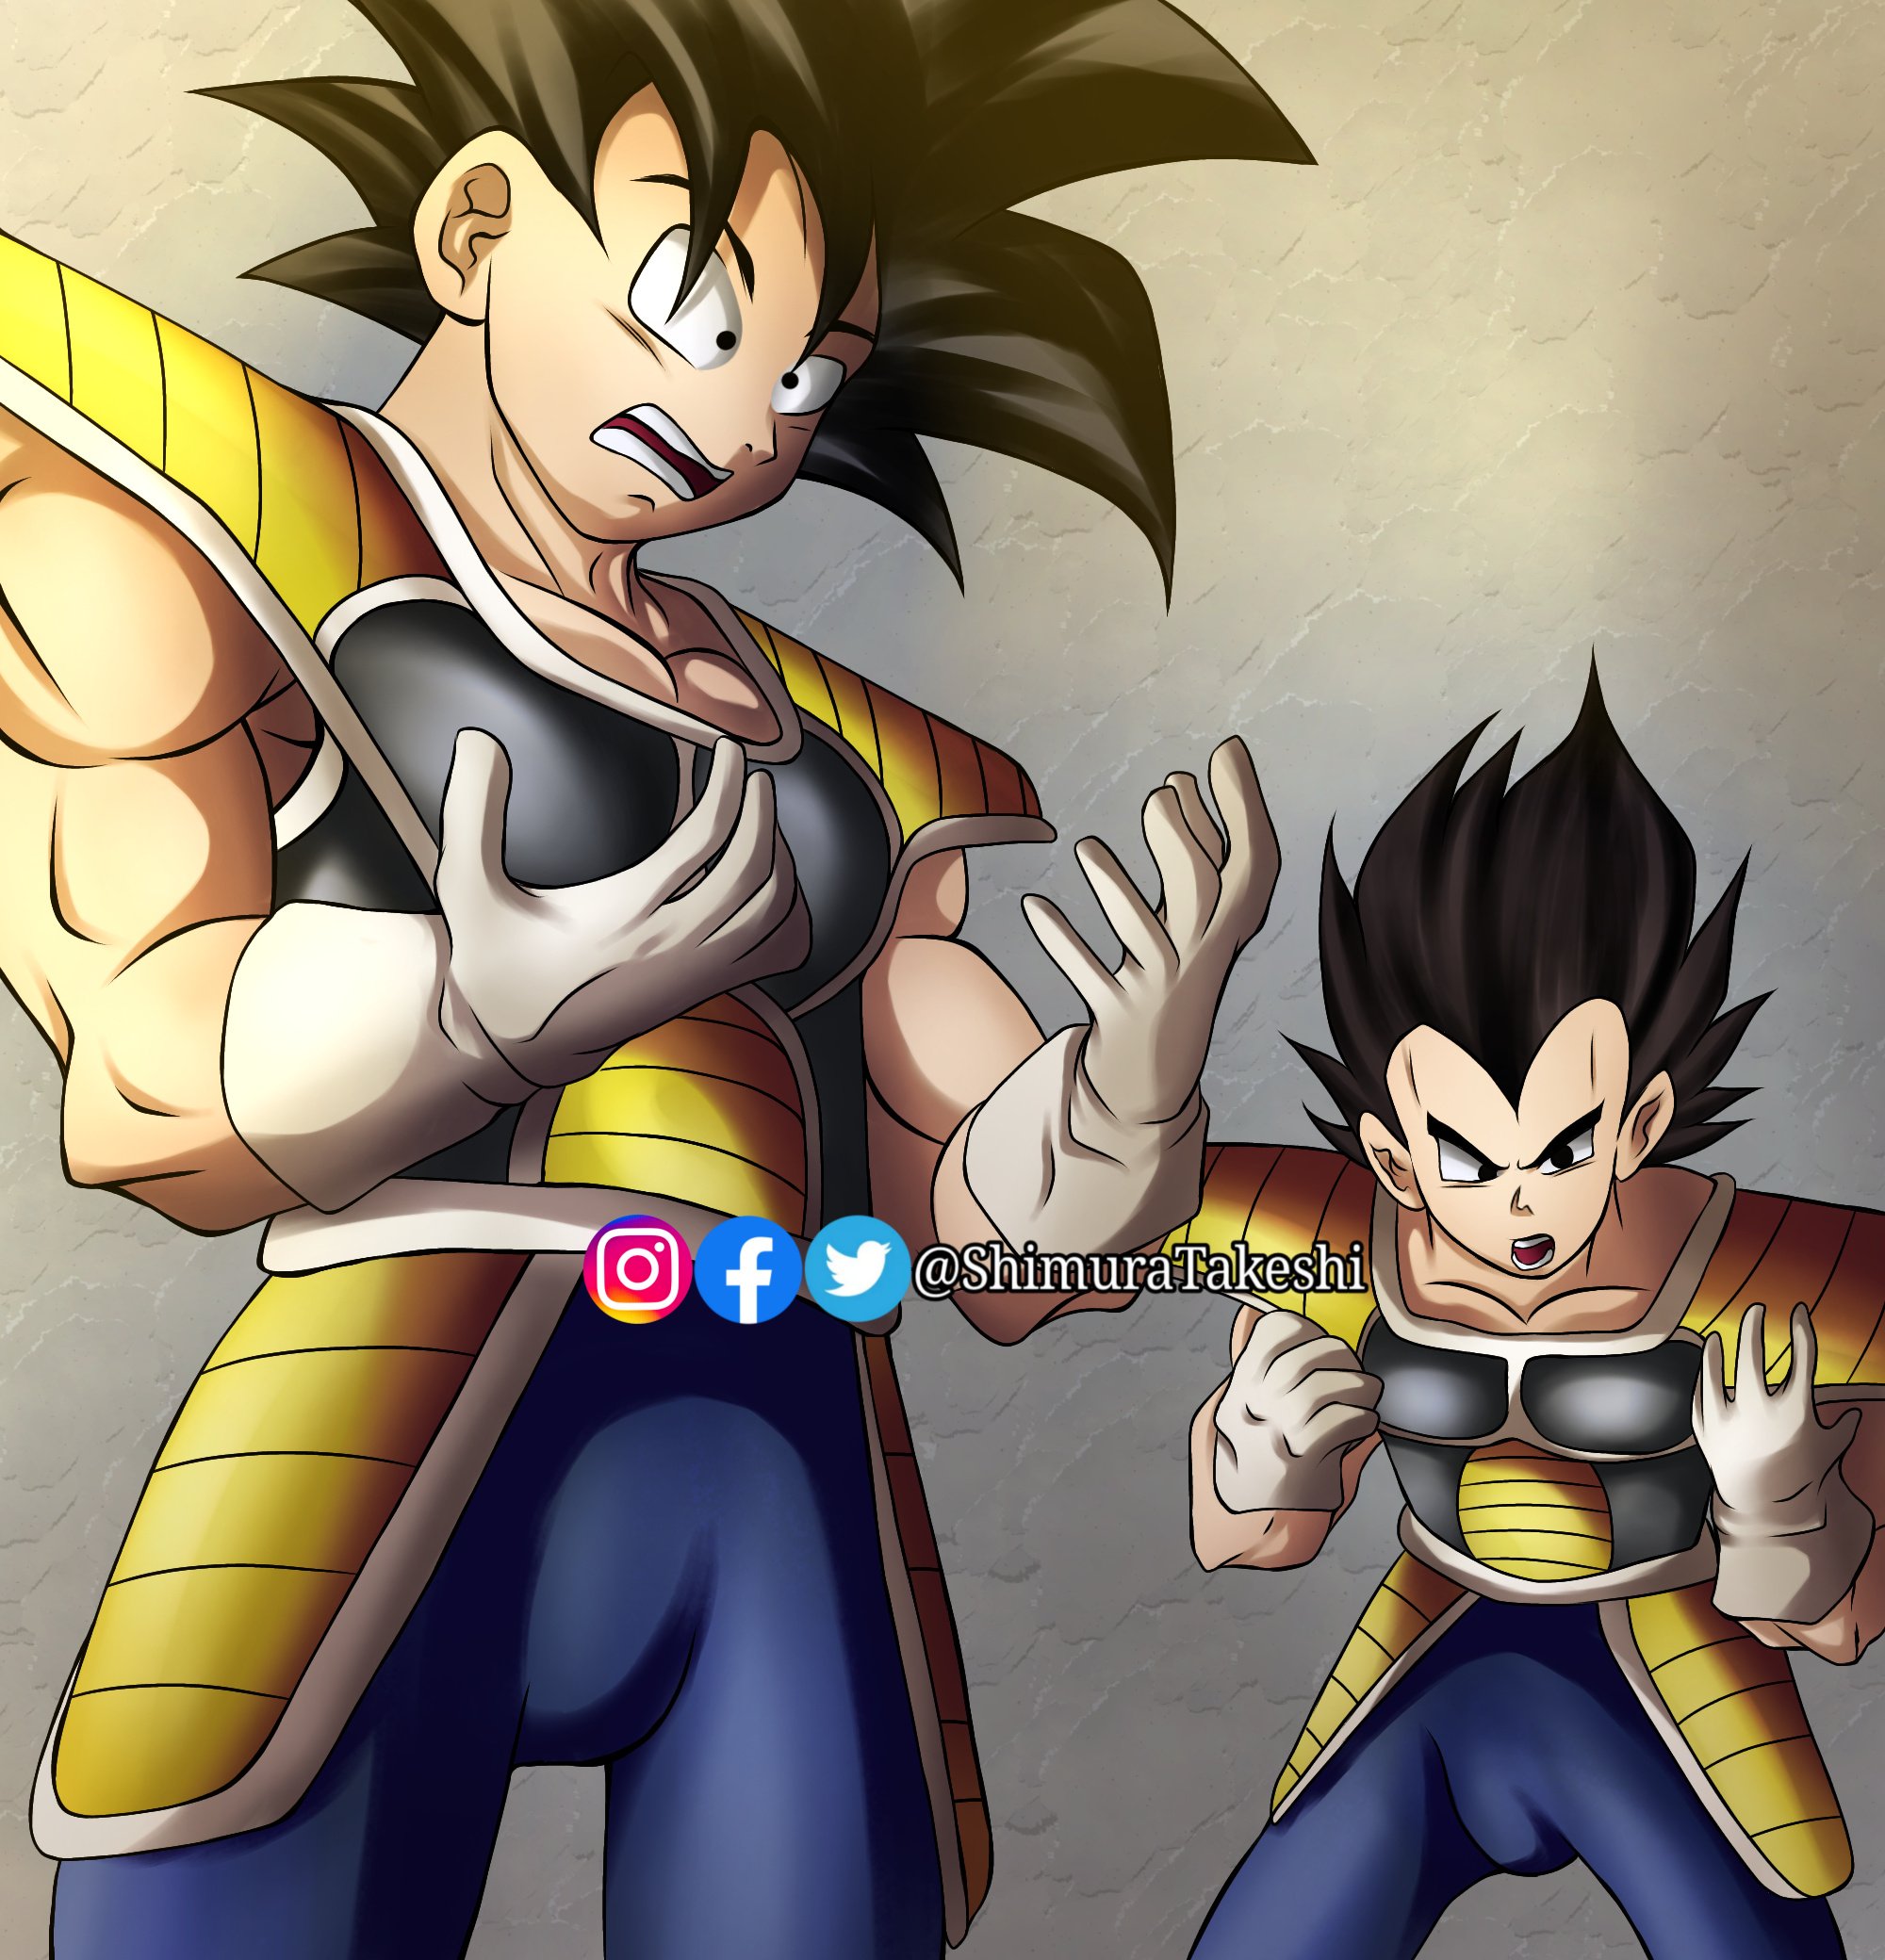 Loved these panels with Vegeta and Goku! : r/Dragonballsuper